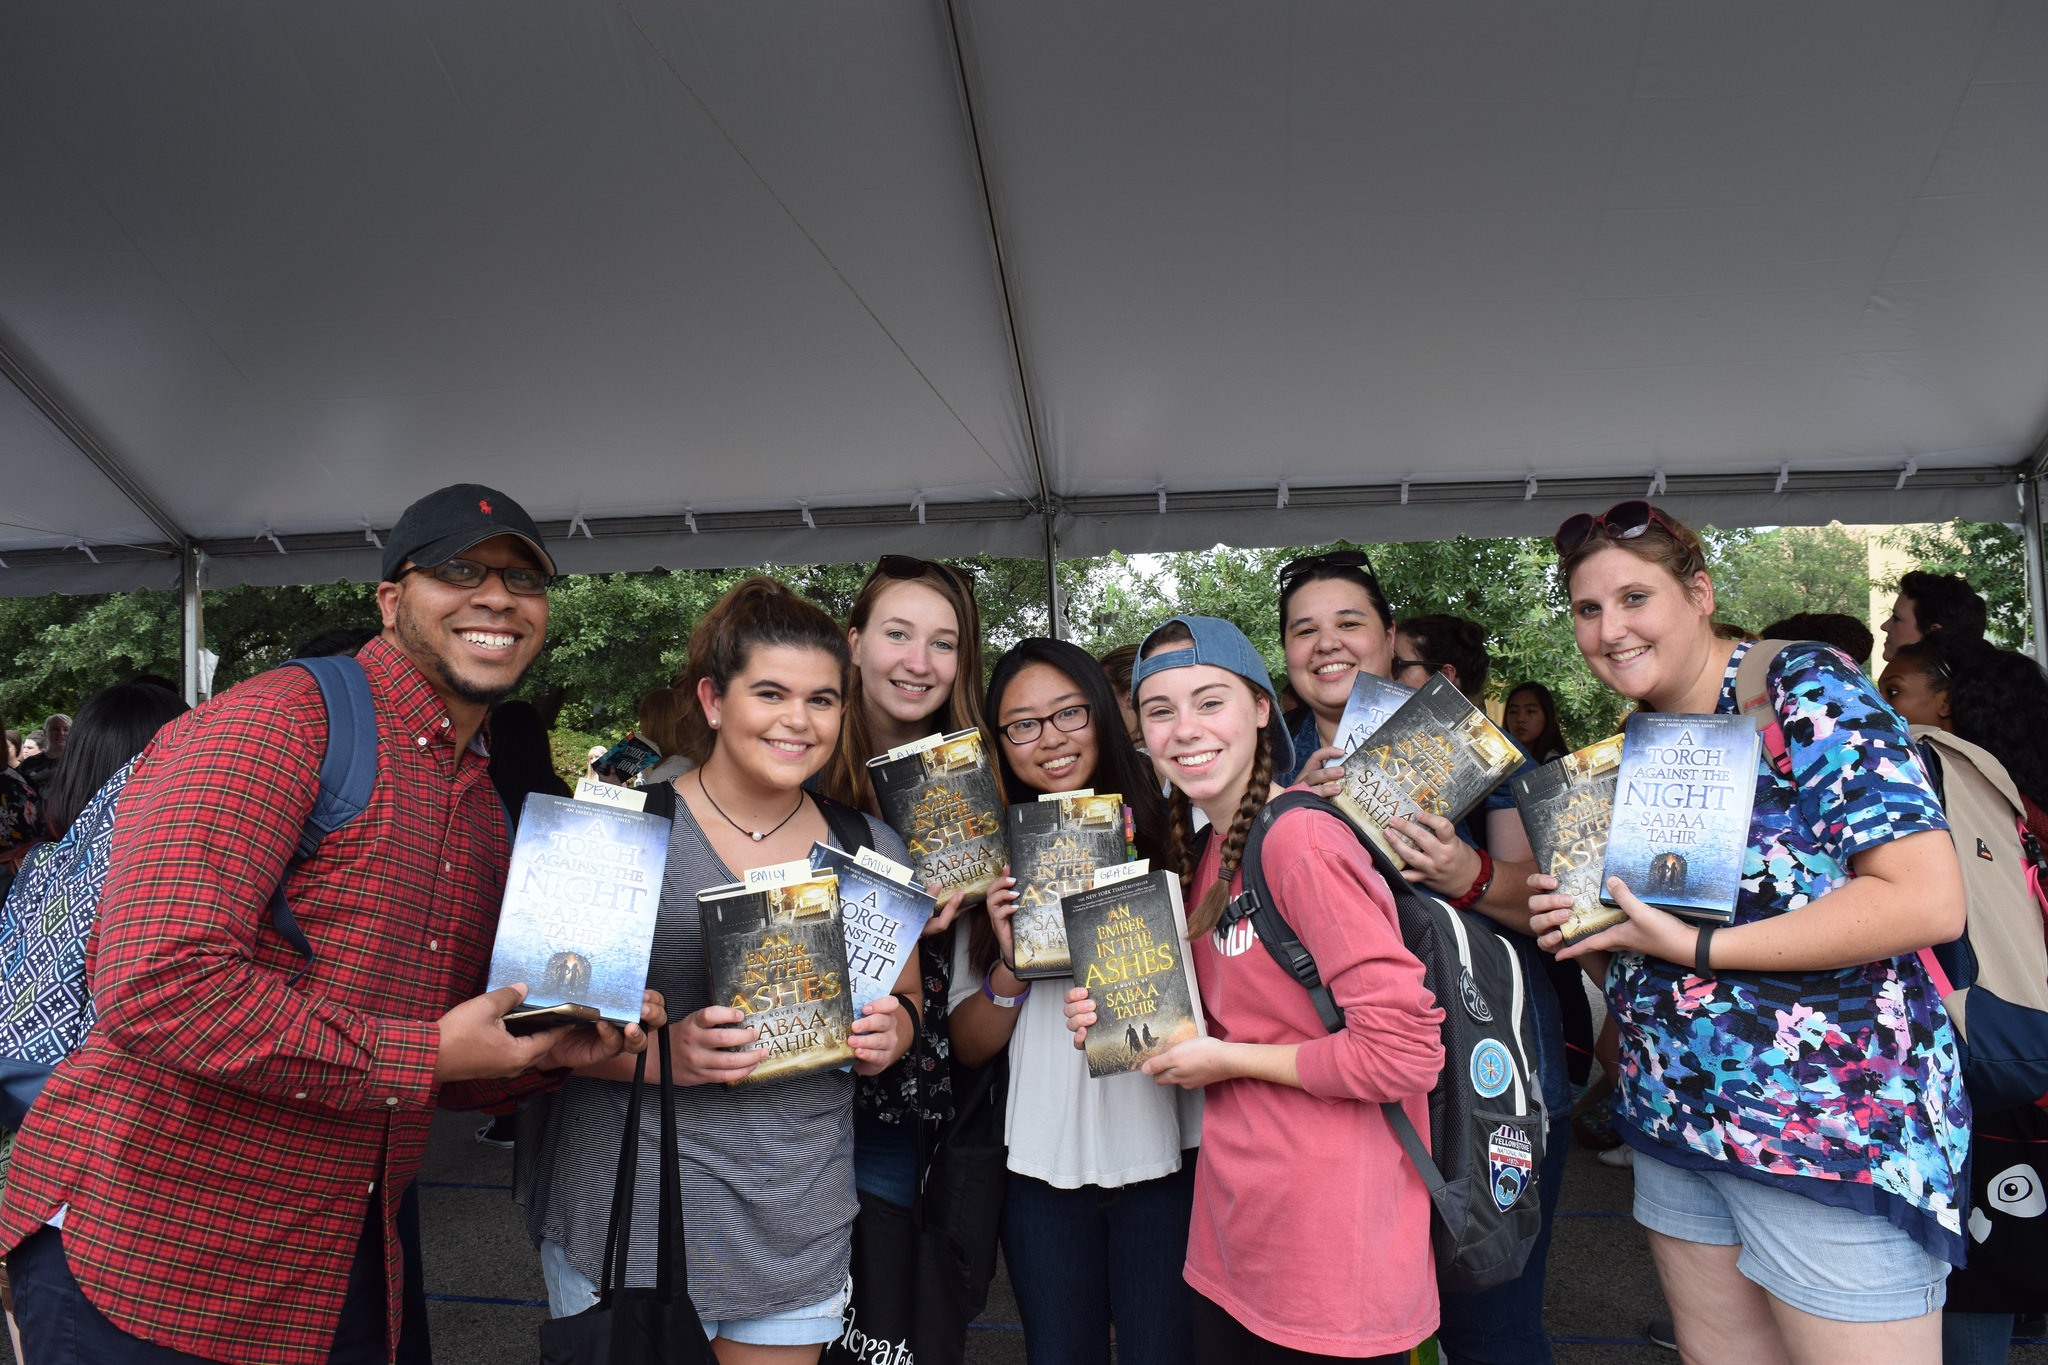 Festival photo of some happy readers